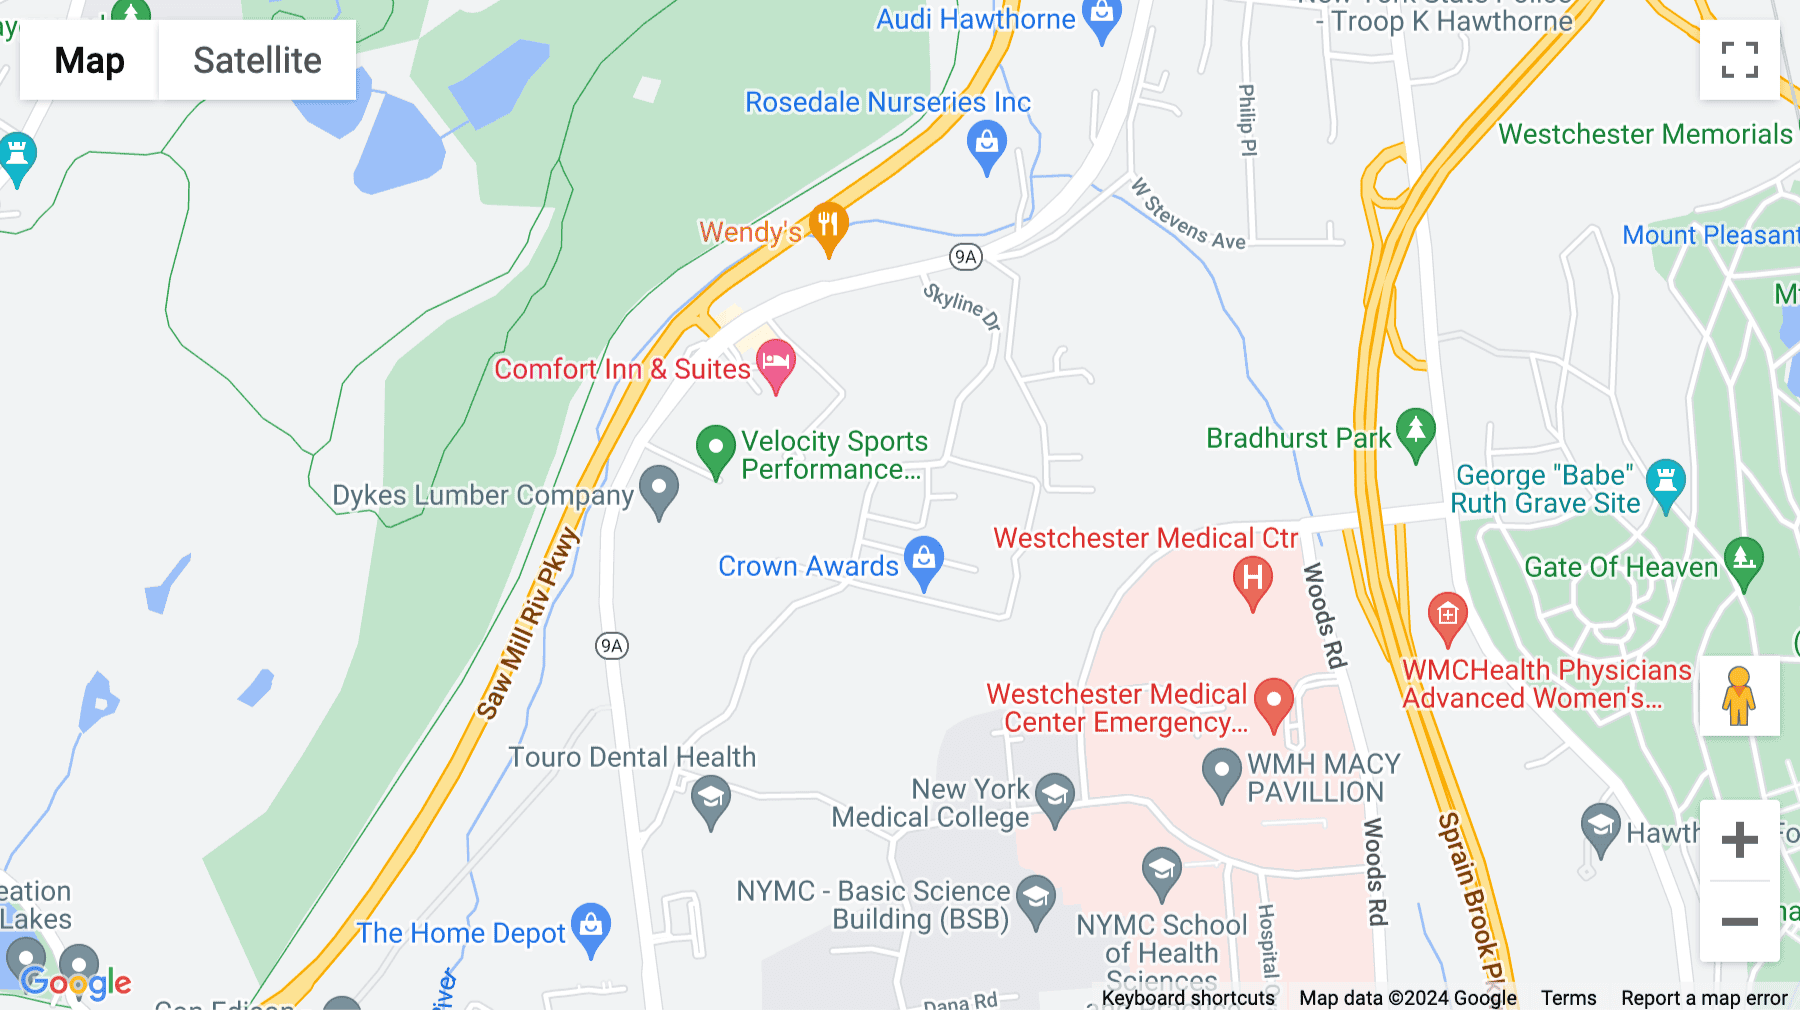 Click for interative map of 7 Skyline Drive, 3rd Floor, Hawthorne